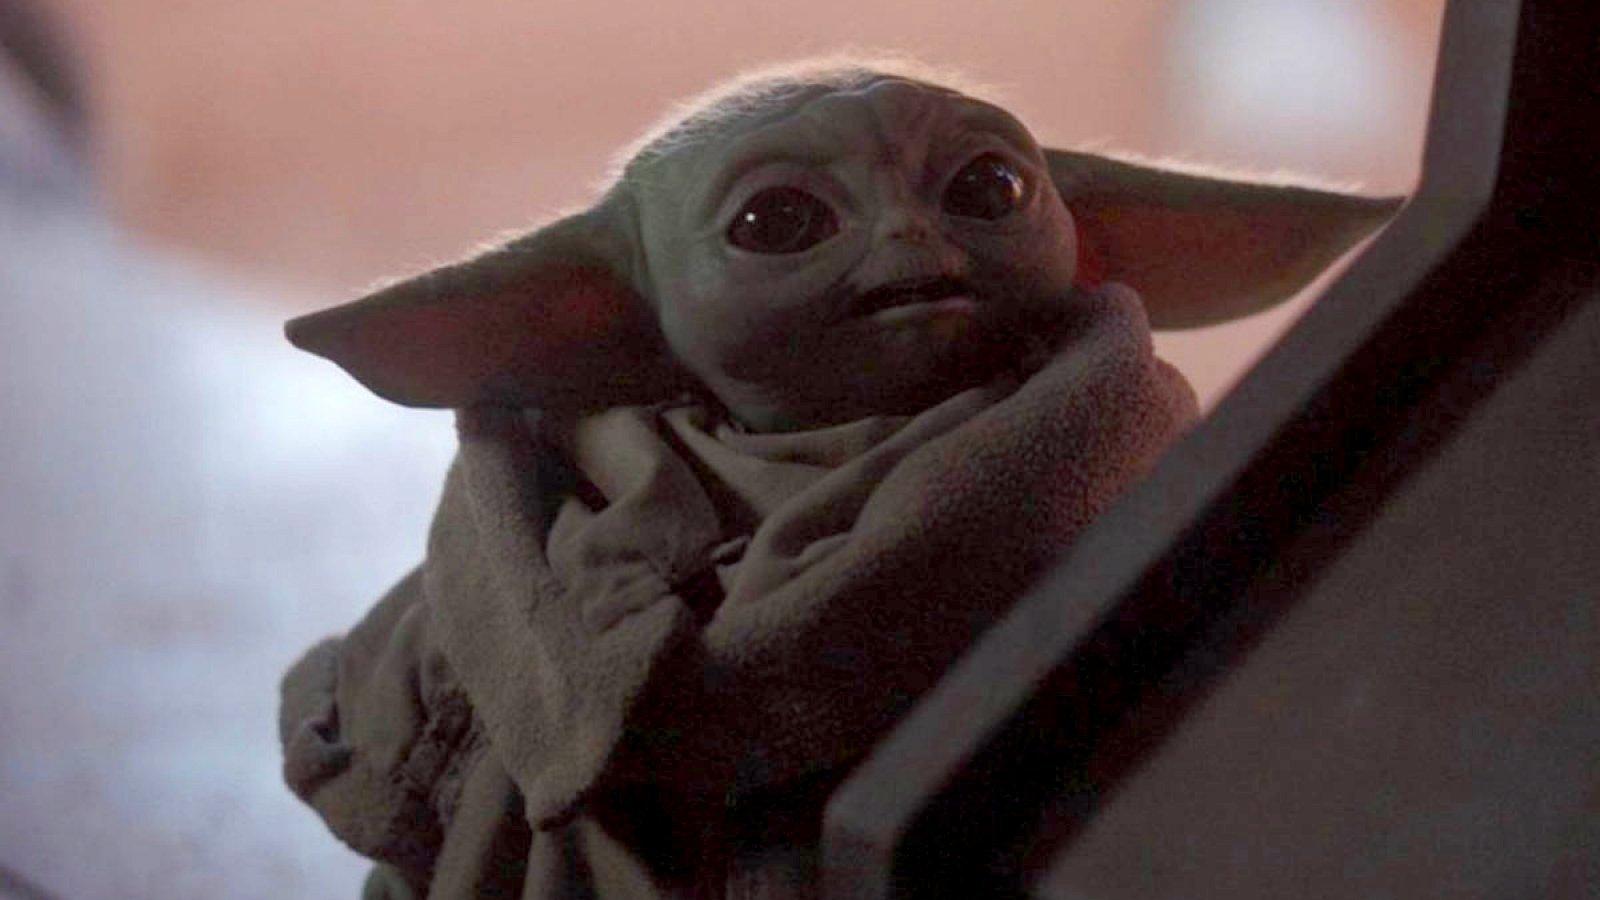 PewDiePie wants to 'eat Baby Yoda' as Star Wars fans freak out